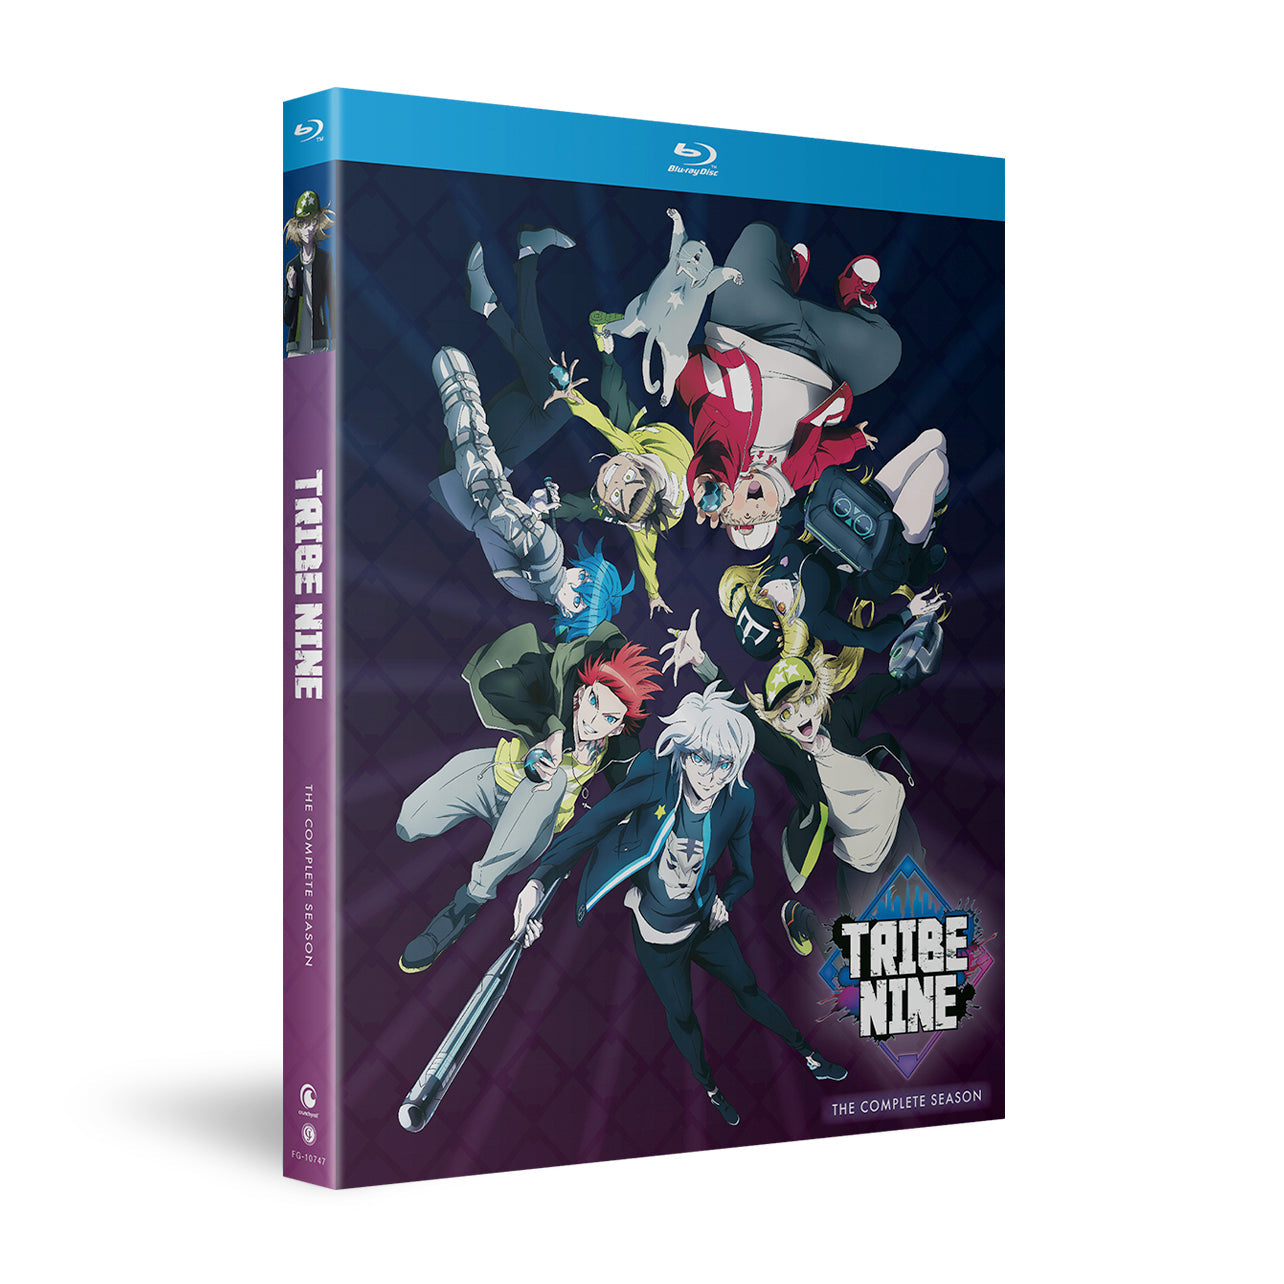 Tribe Nine - The Complete Season - Blu-ray image count 2